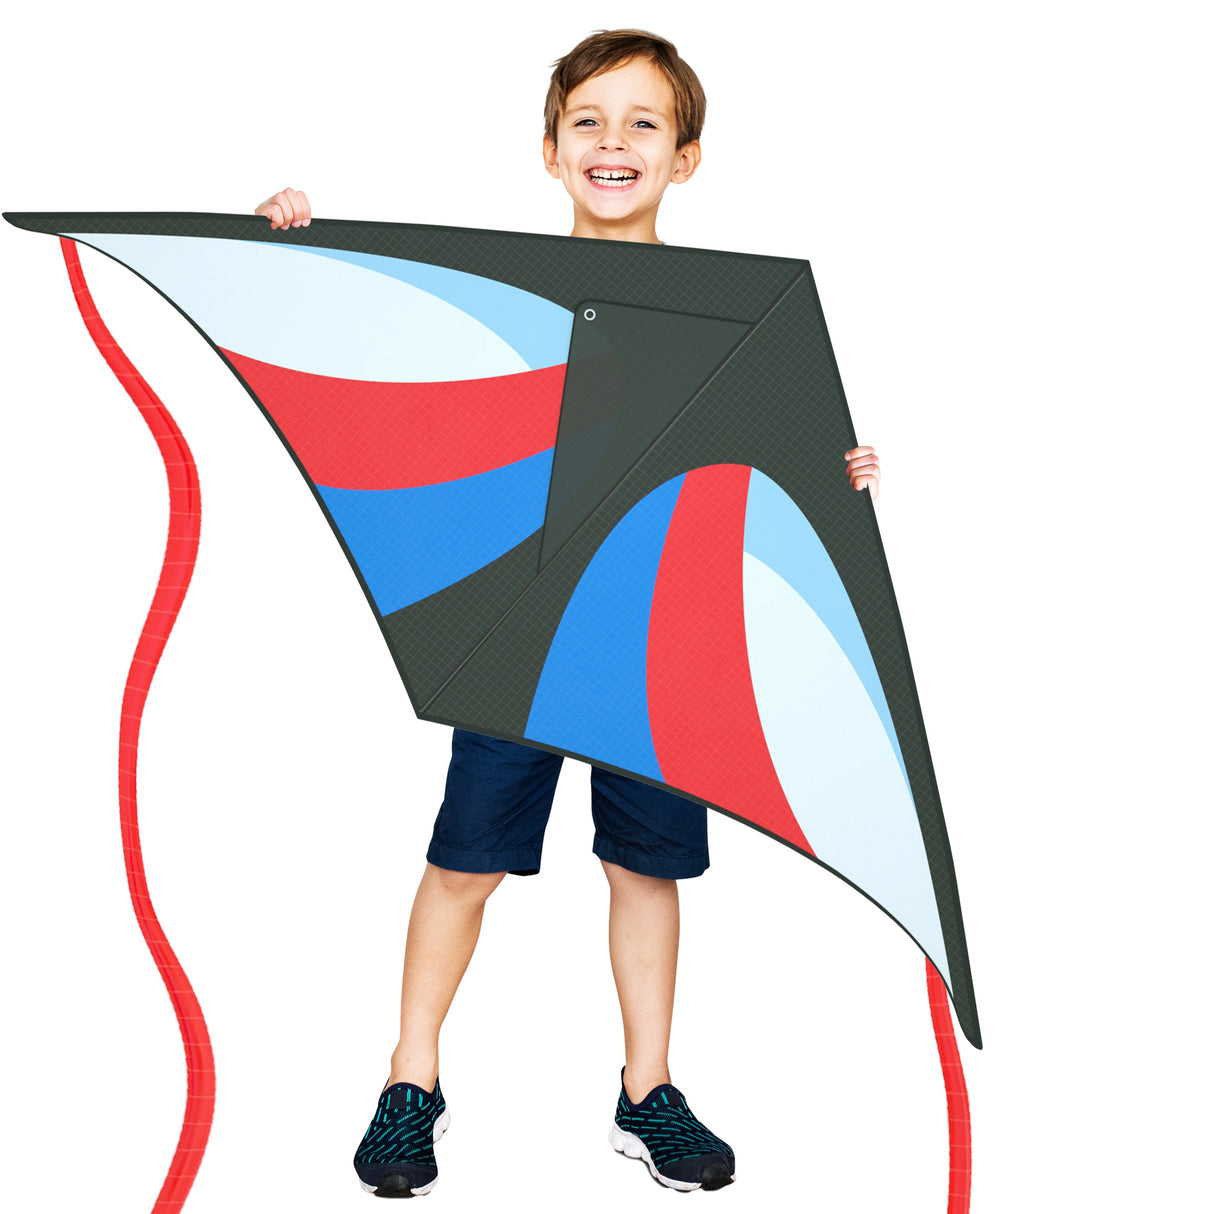 JEKOSEN 55"Delta Kite, Durable and Easy to Fly, Suitable for Children and Adults Travel Beach Park Outdoor Activities - GexWorldwide